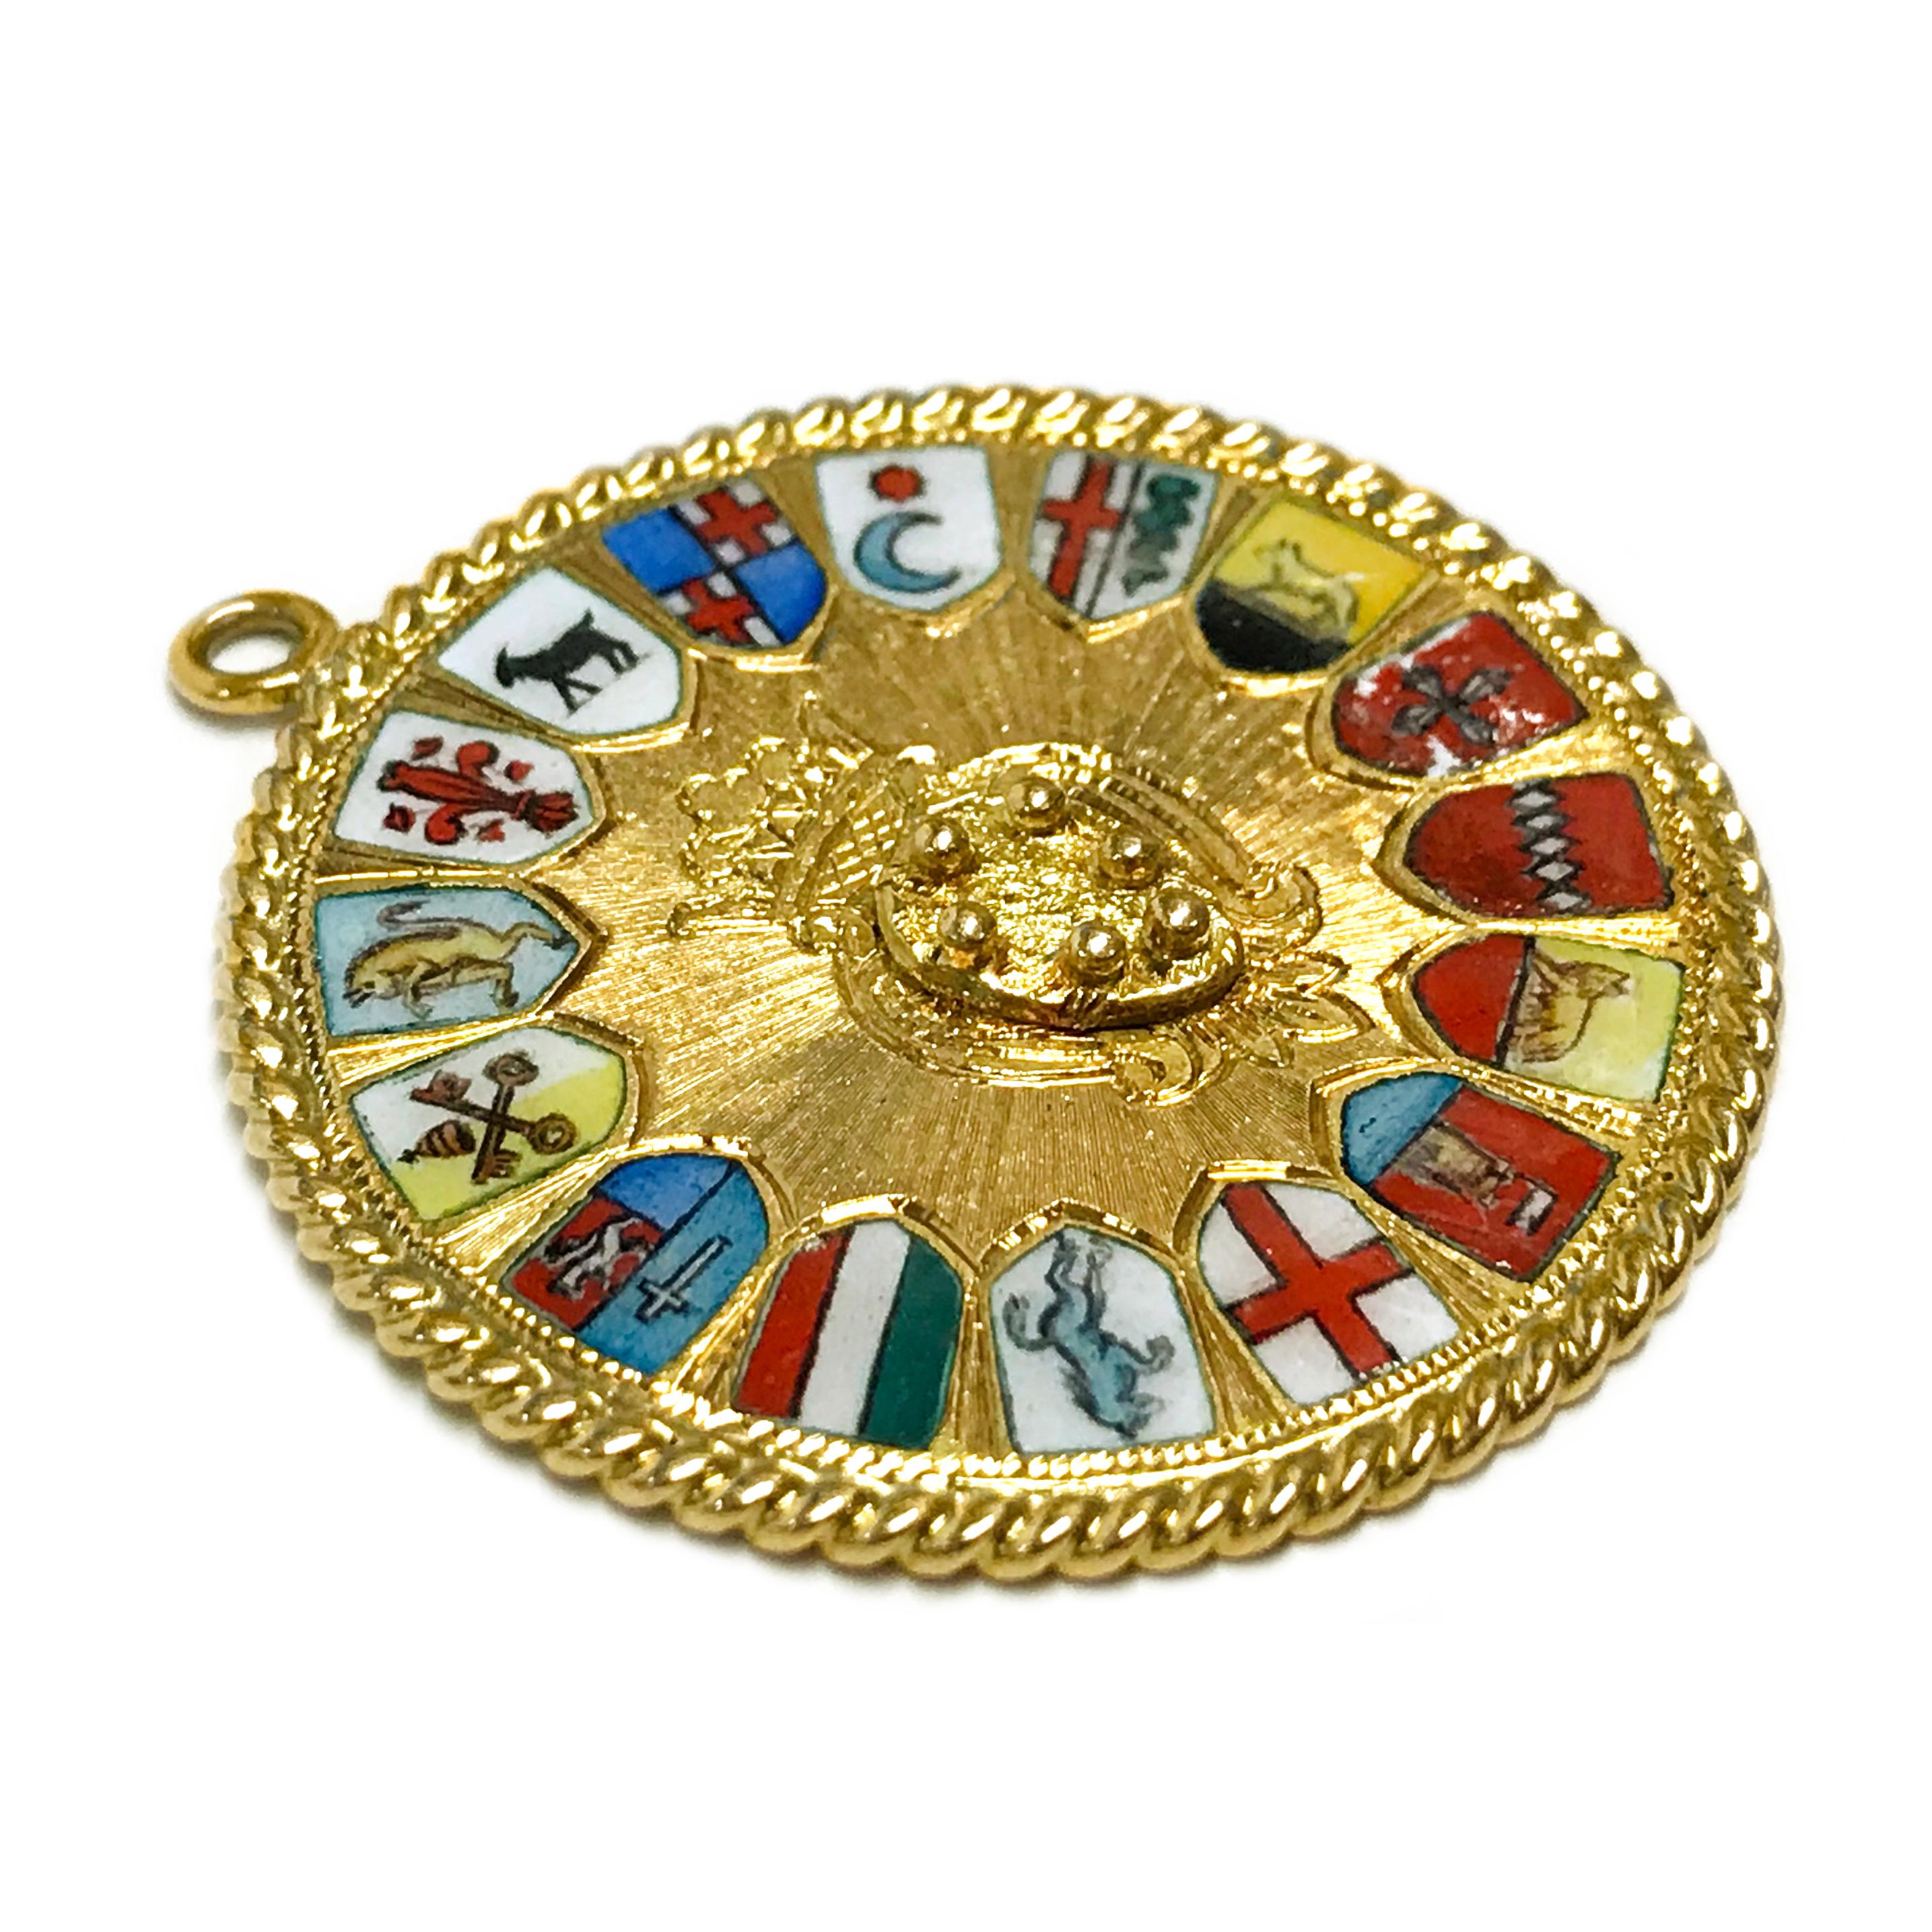 14 Karat Italian Coat of Arms Medallion Pendant. The pendant measures 34.98mm in diameter. The front and back of the pendant have a radial texture. The front of the pendant has an engraved crest with a crown and all around are enamel Italian coat of